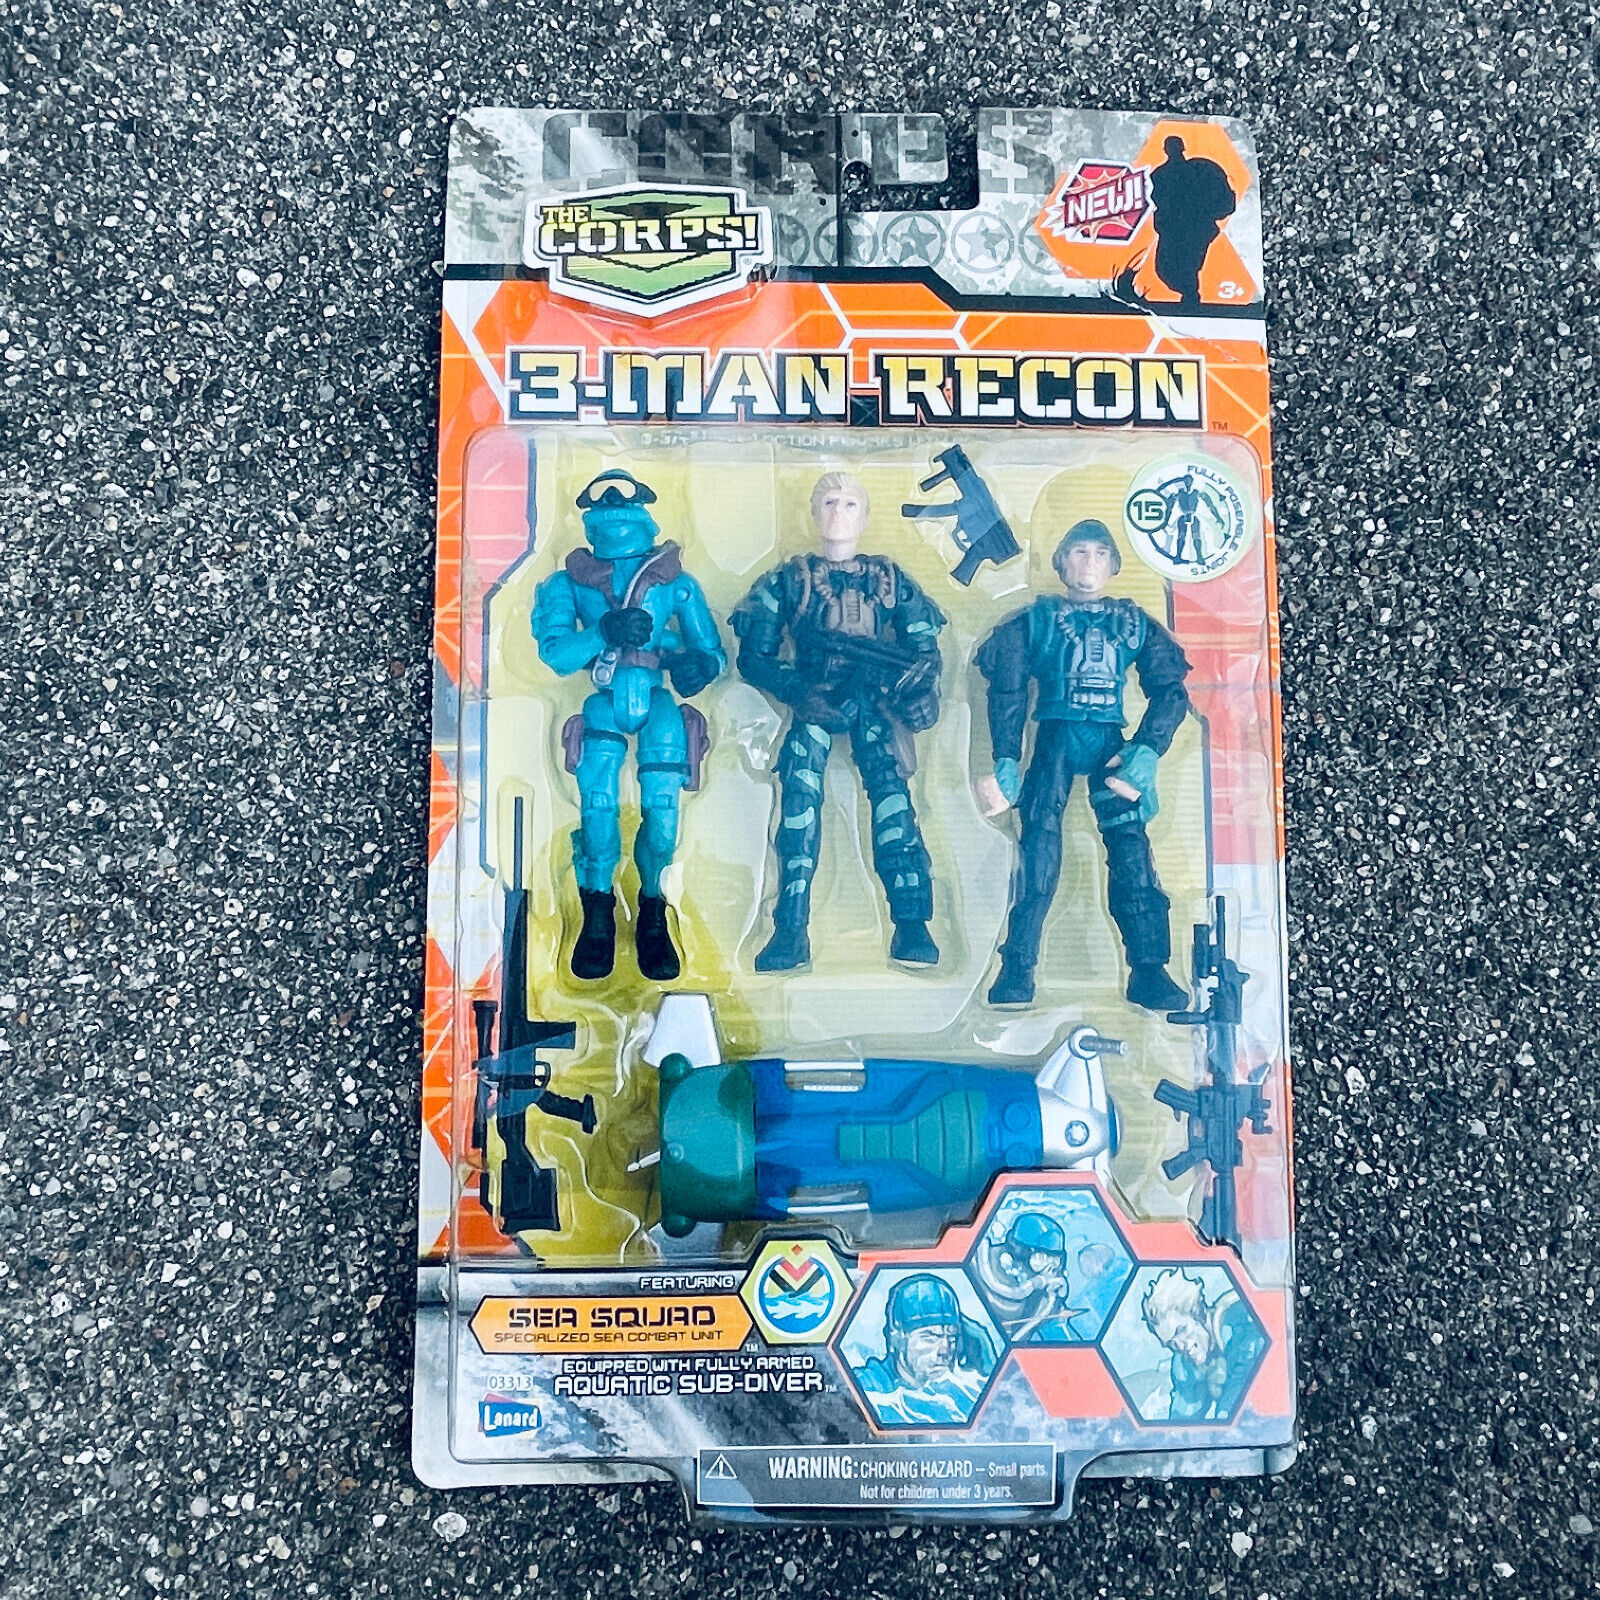 Lanard Toys The Corps 3-Man Recon Sea Squad, New On Card 2008 - $33.92